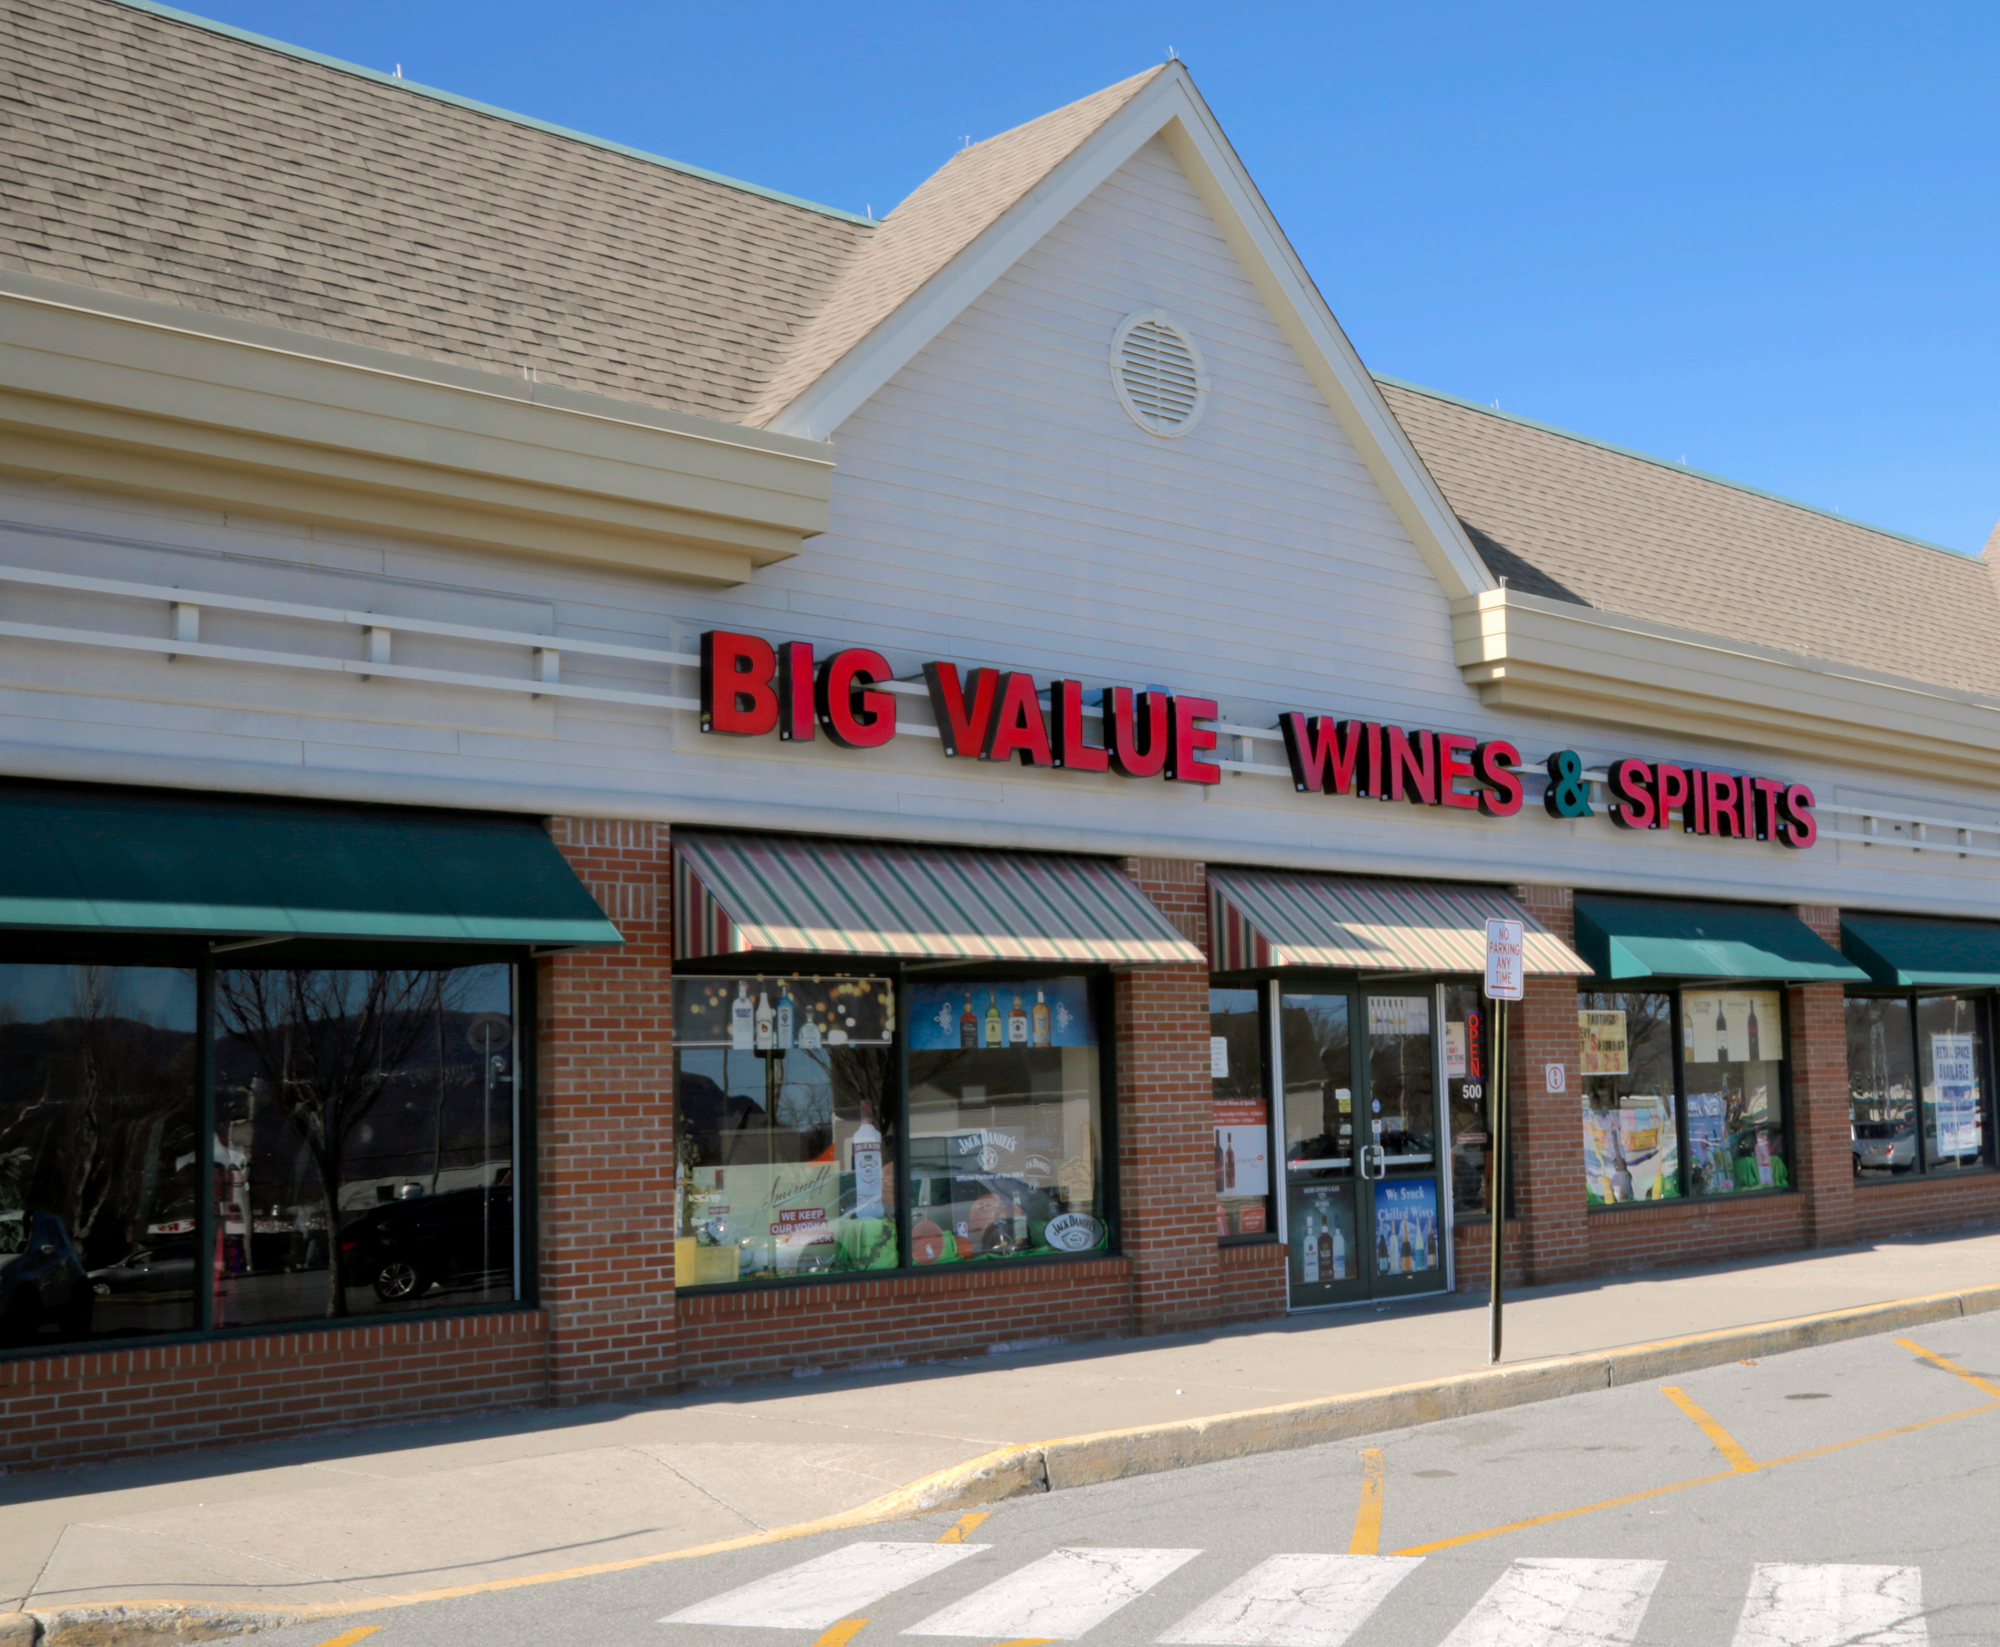 Big value Wines and Spirits